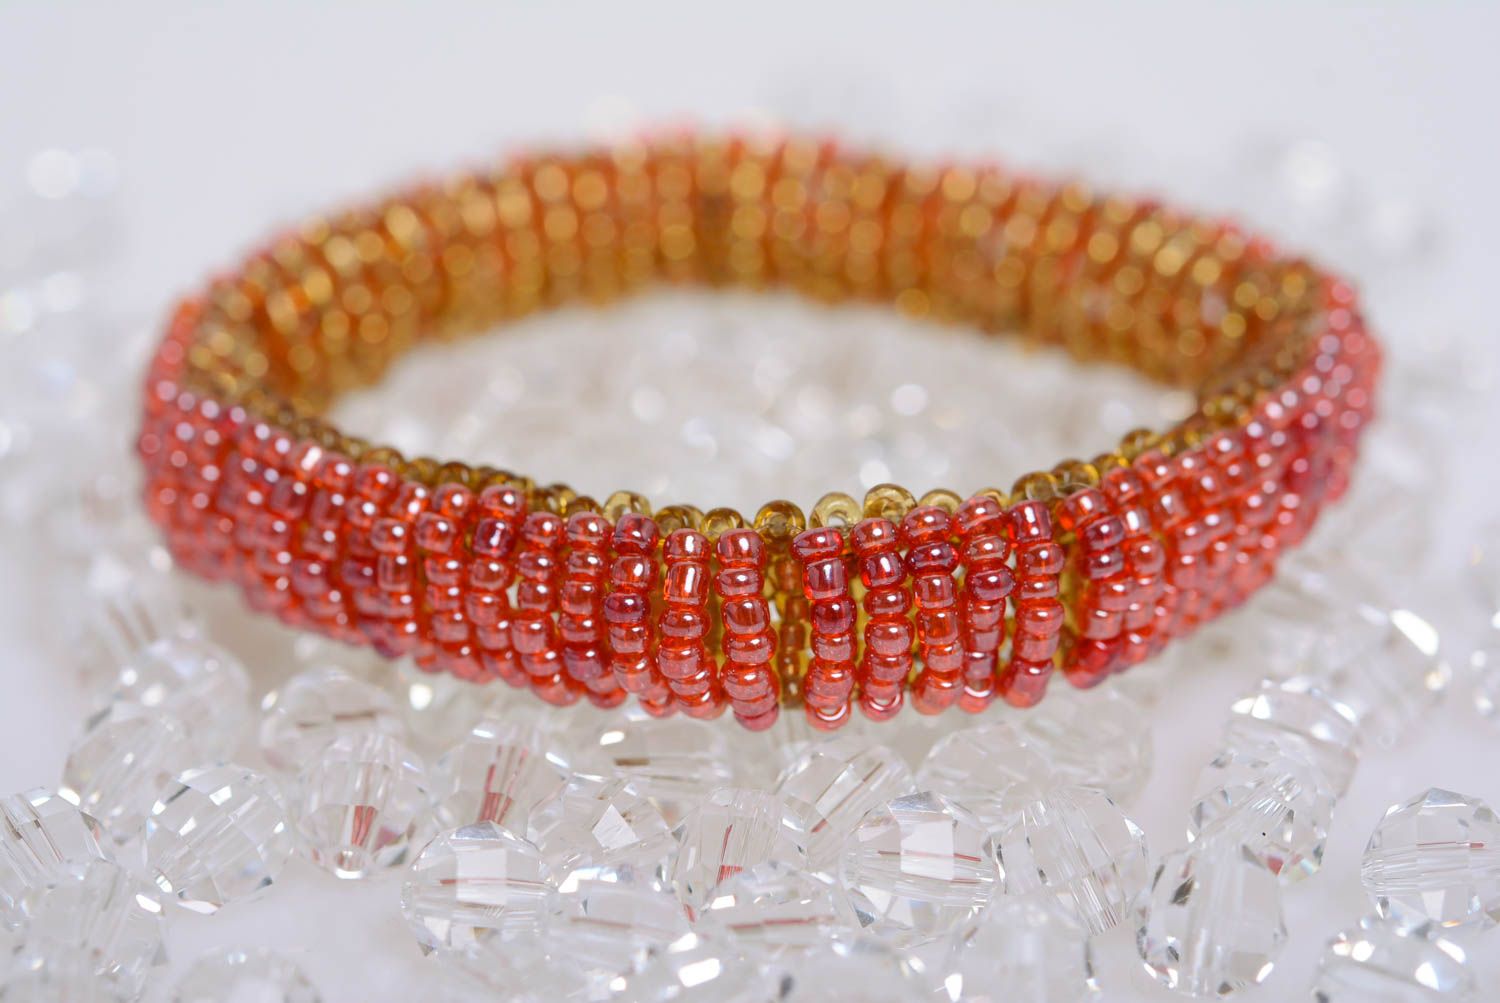 Beaded handmade bracelet in red and yellow colors everyday stylish jewelry photo 1